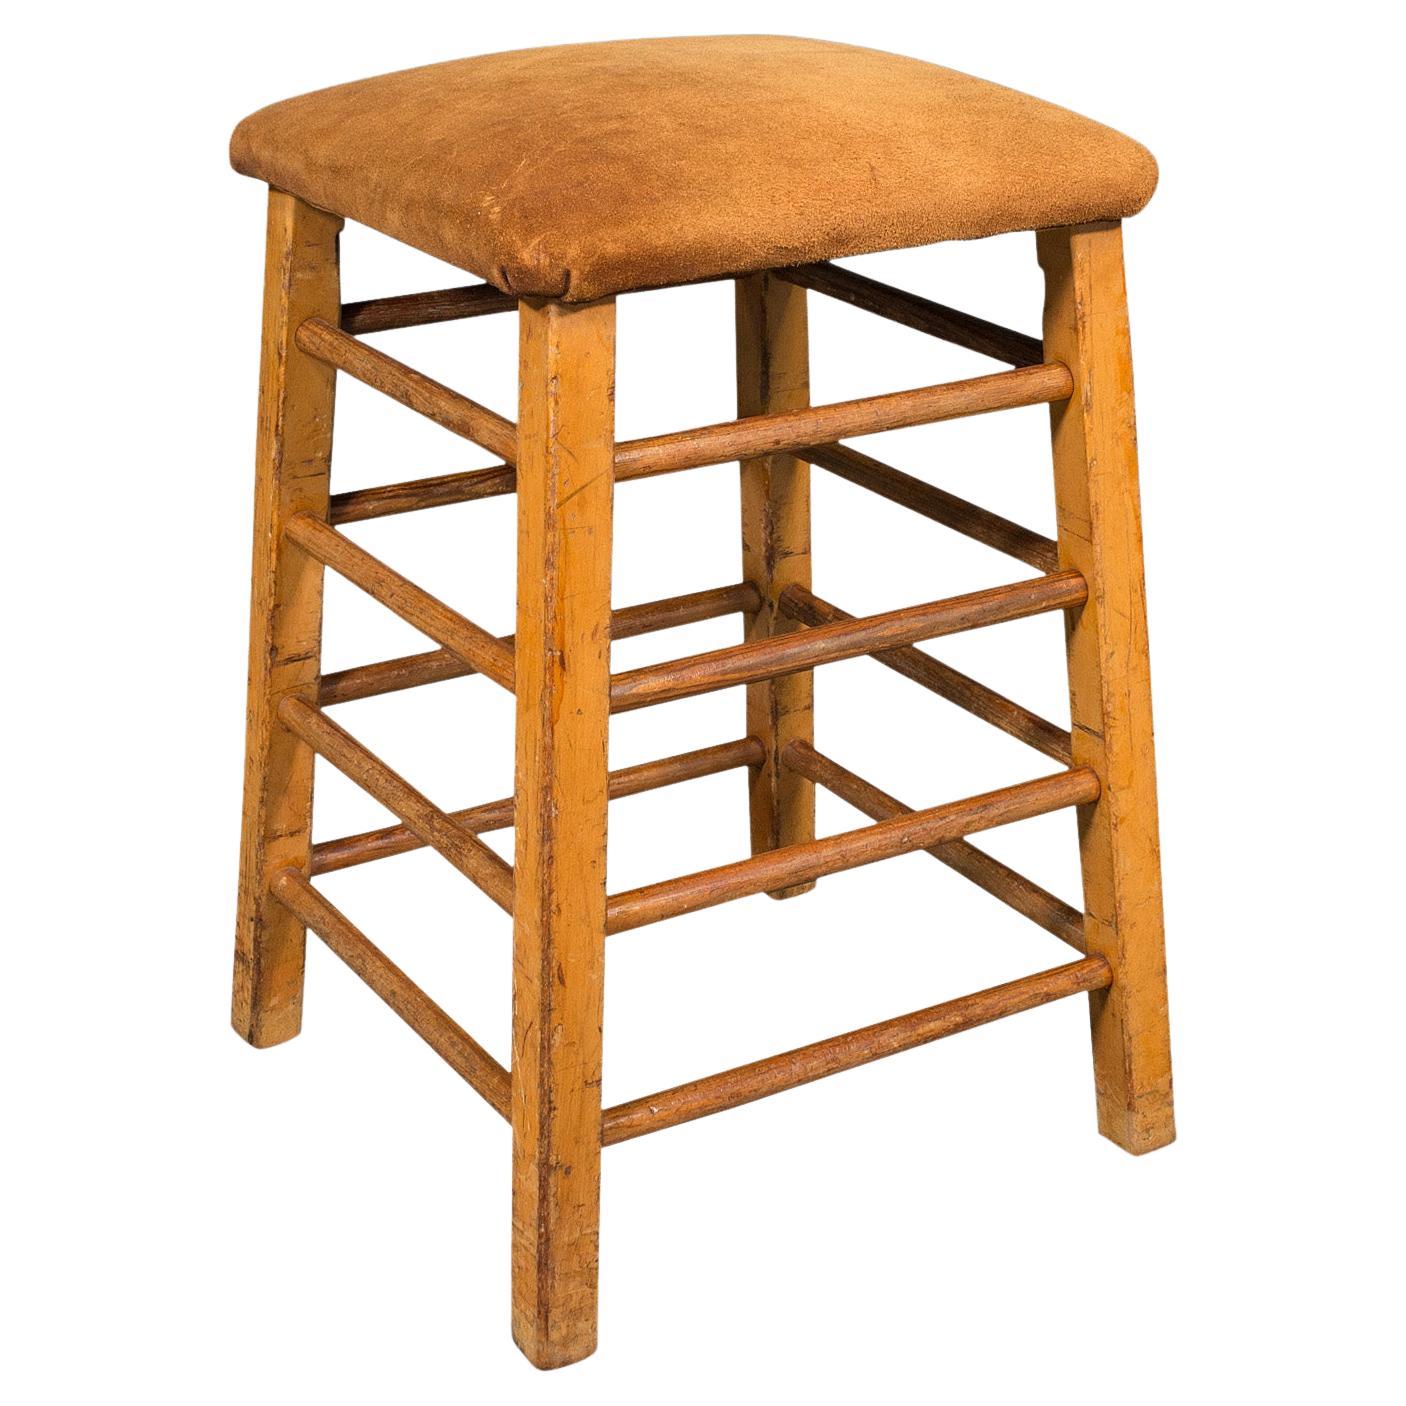 Large Vintage Artist's Stool, English, Pitch Pine, Suede, Gym, Lab Seat, C.1960 For Sale